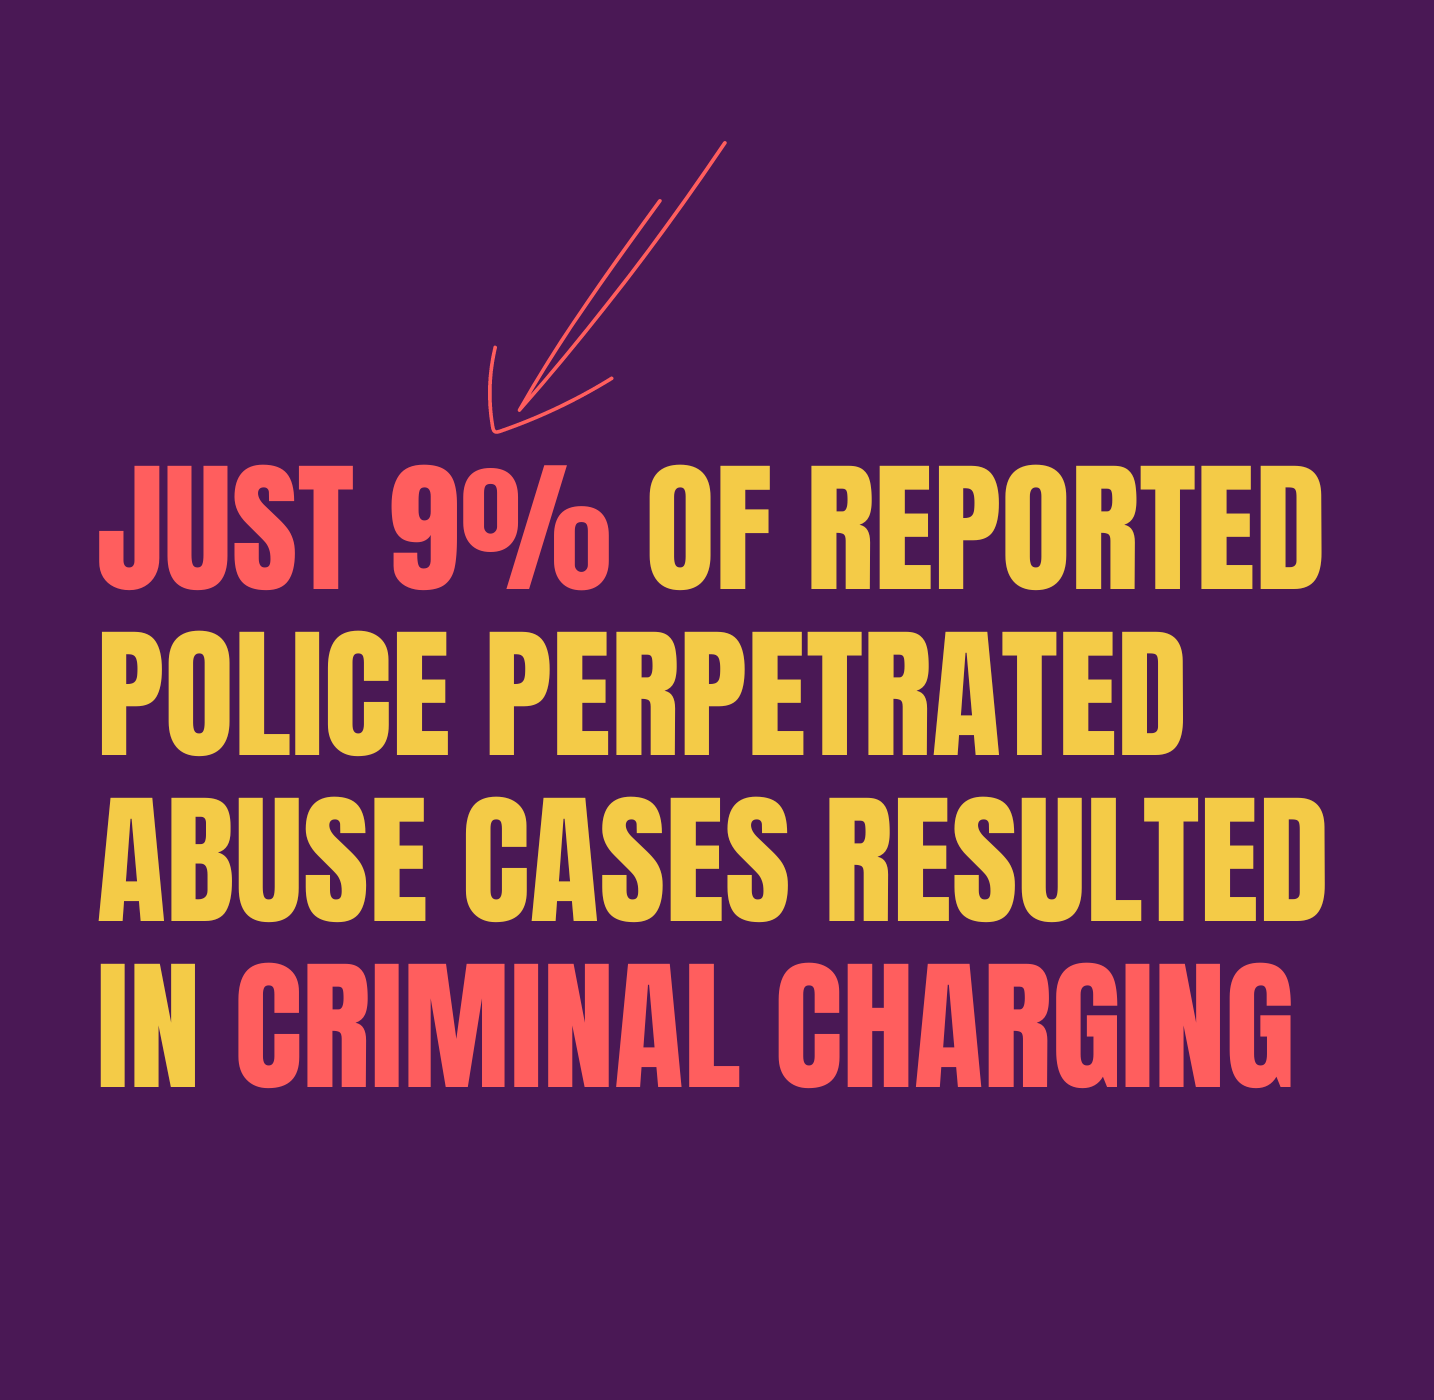 Just 9% Of Reported Police Perpetrated Abuse Cases Resulted In Criminal Charging